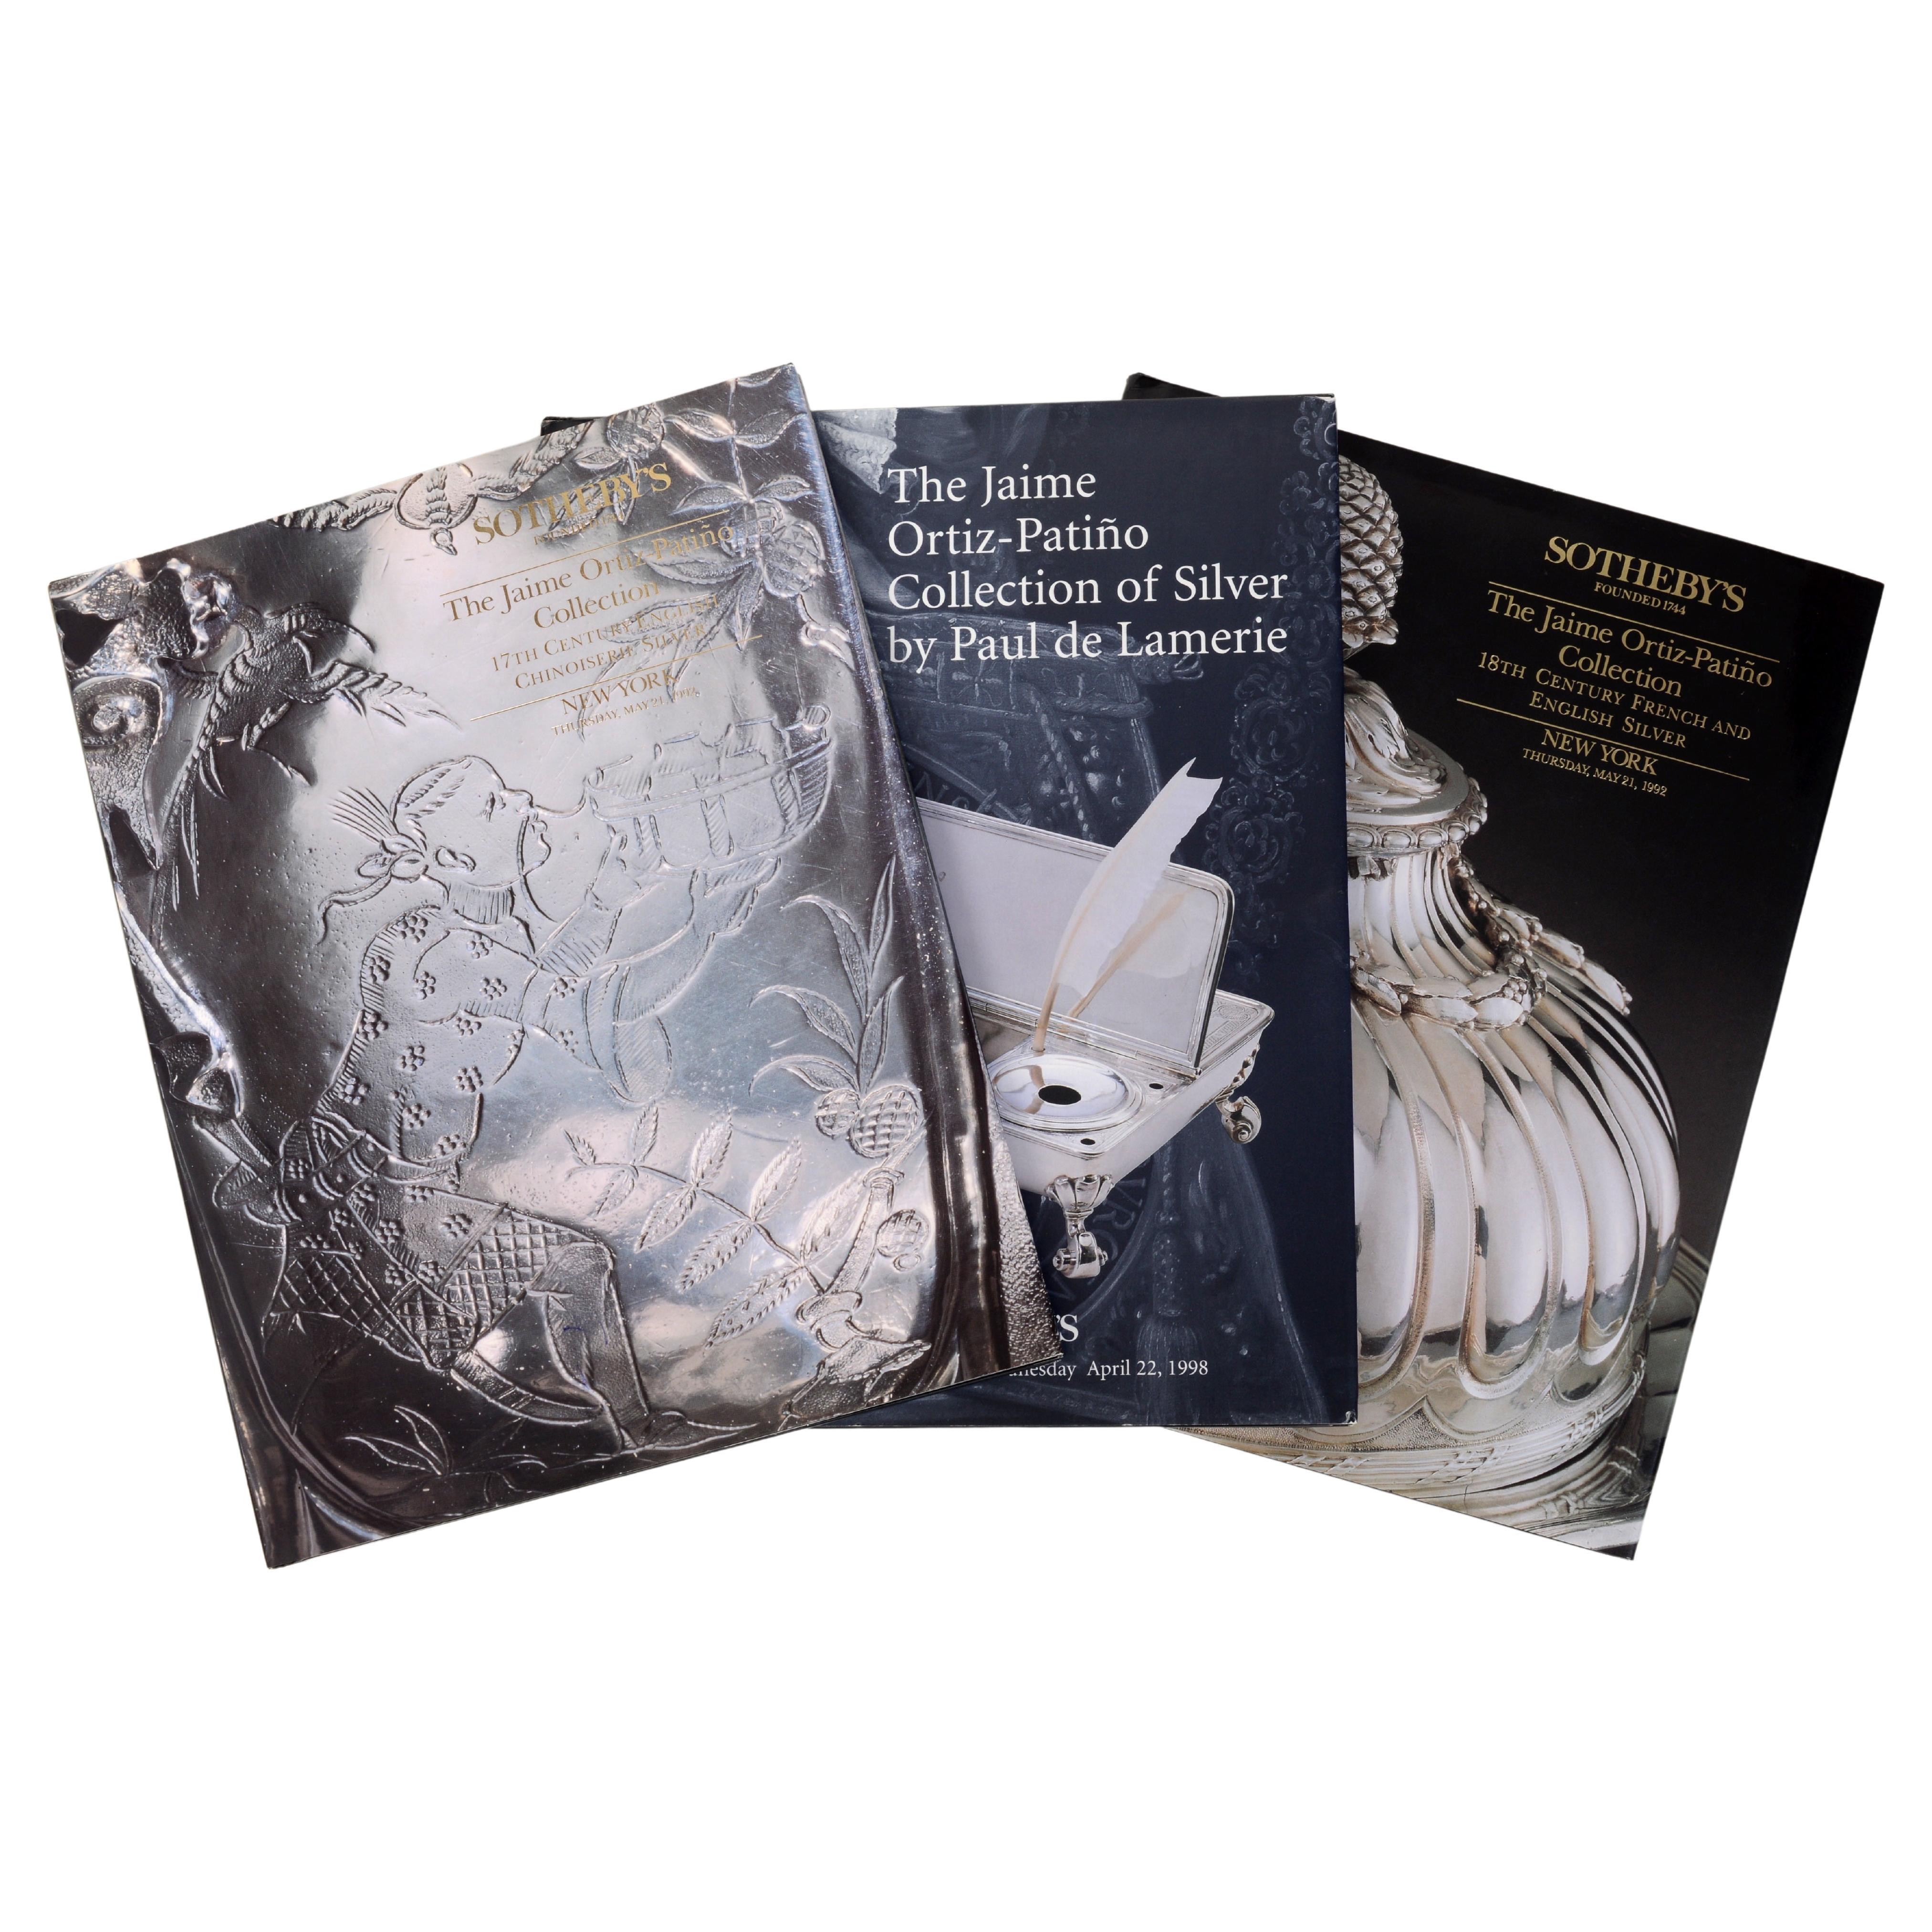 Set of 3 Sotheby's Catalogs: the Jaime Ortiz-patiño Collections of Silver For Sale